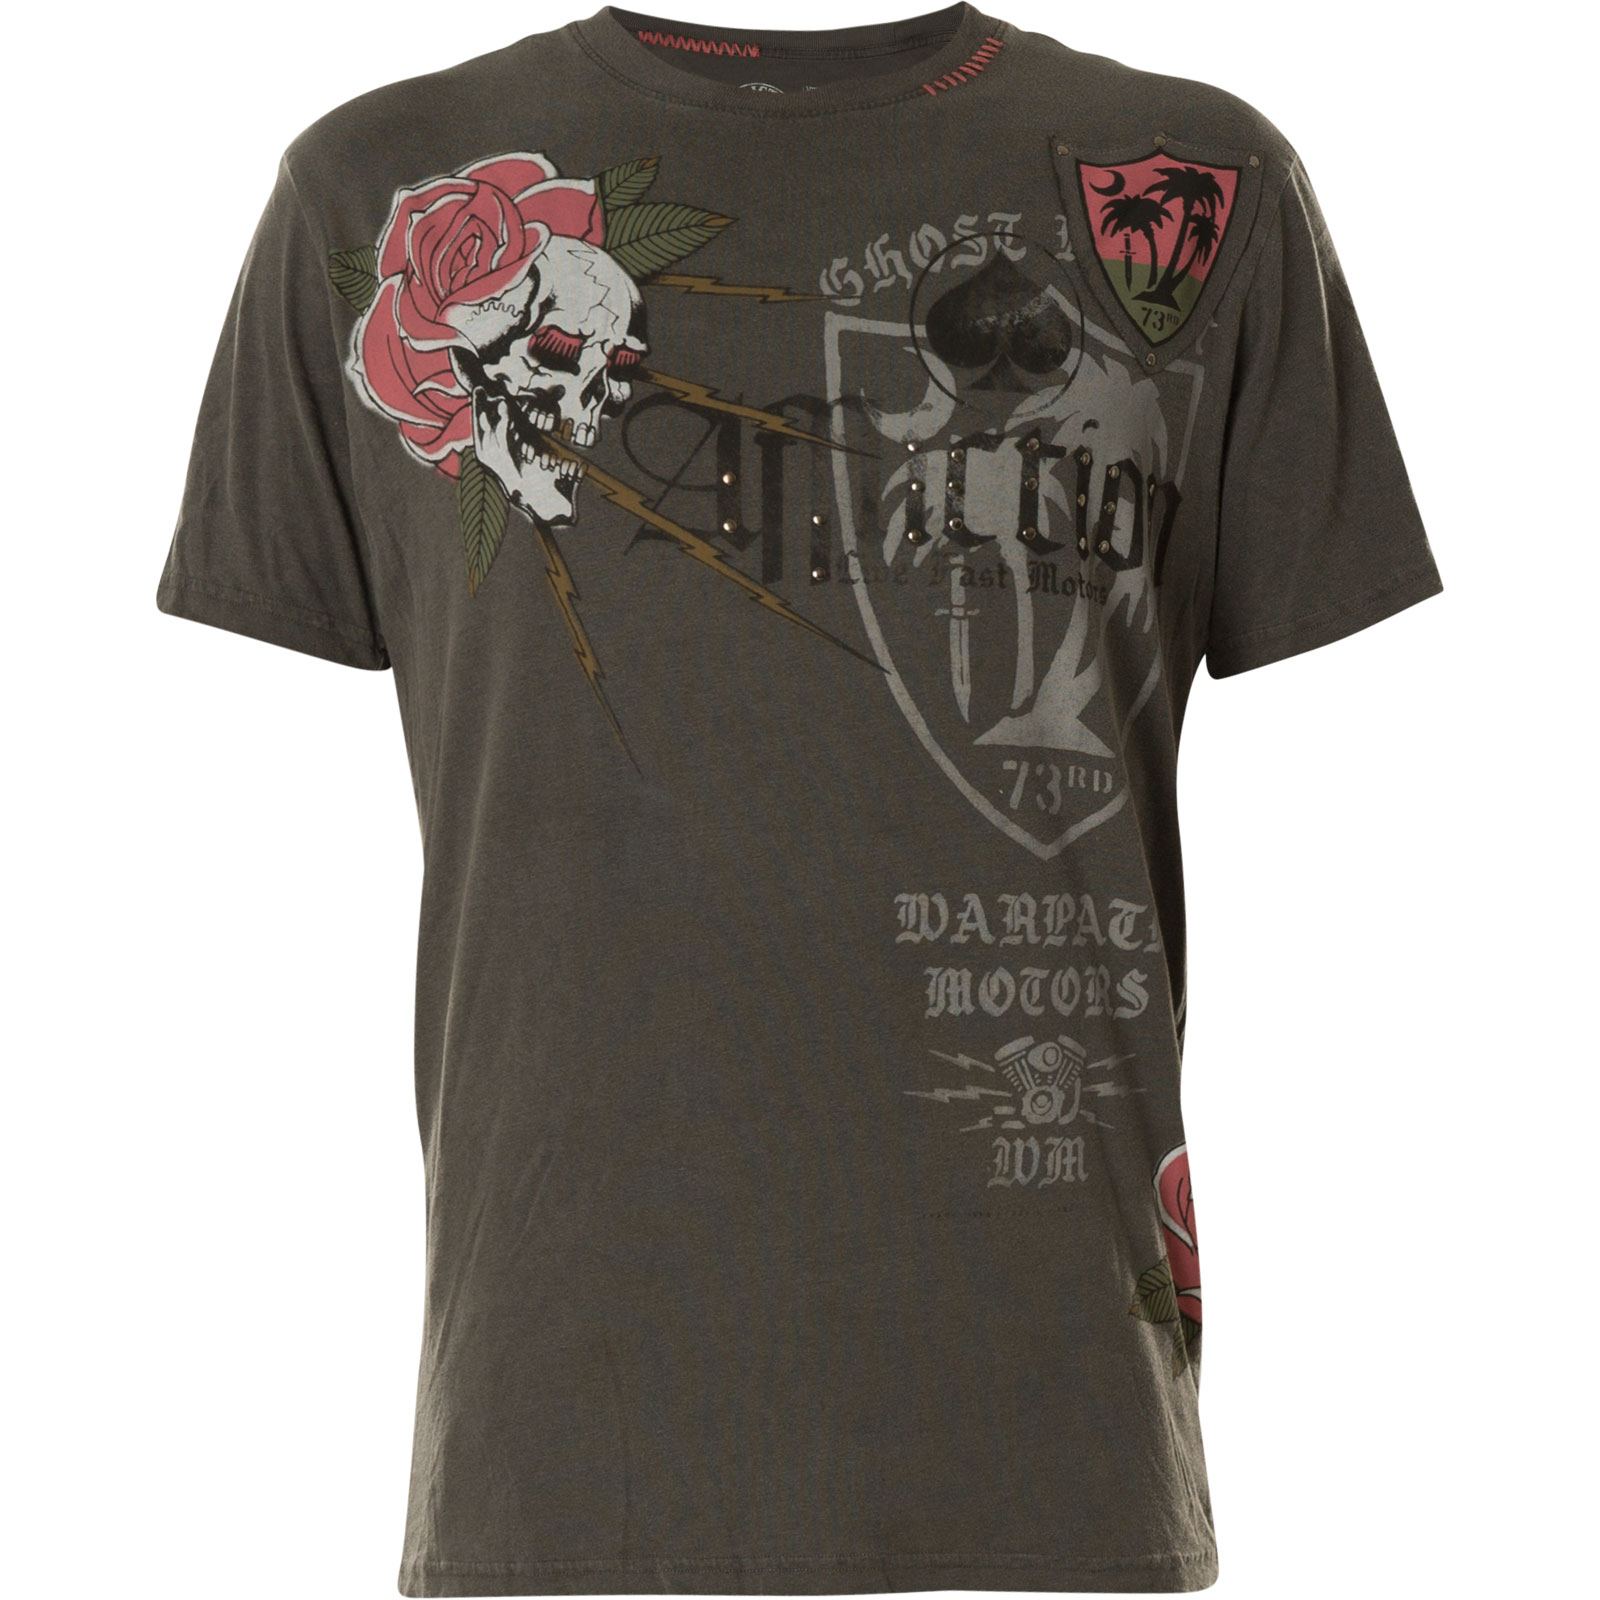 Affliction The Beach T-Shirt featuring a skull and roses